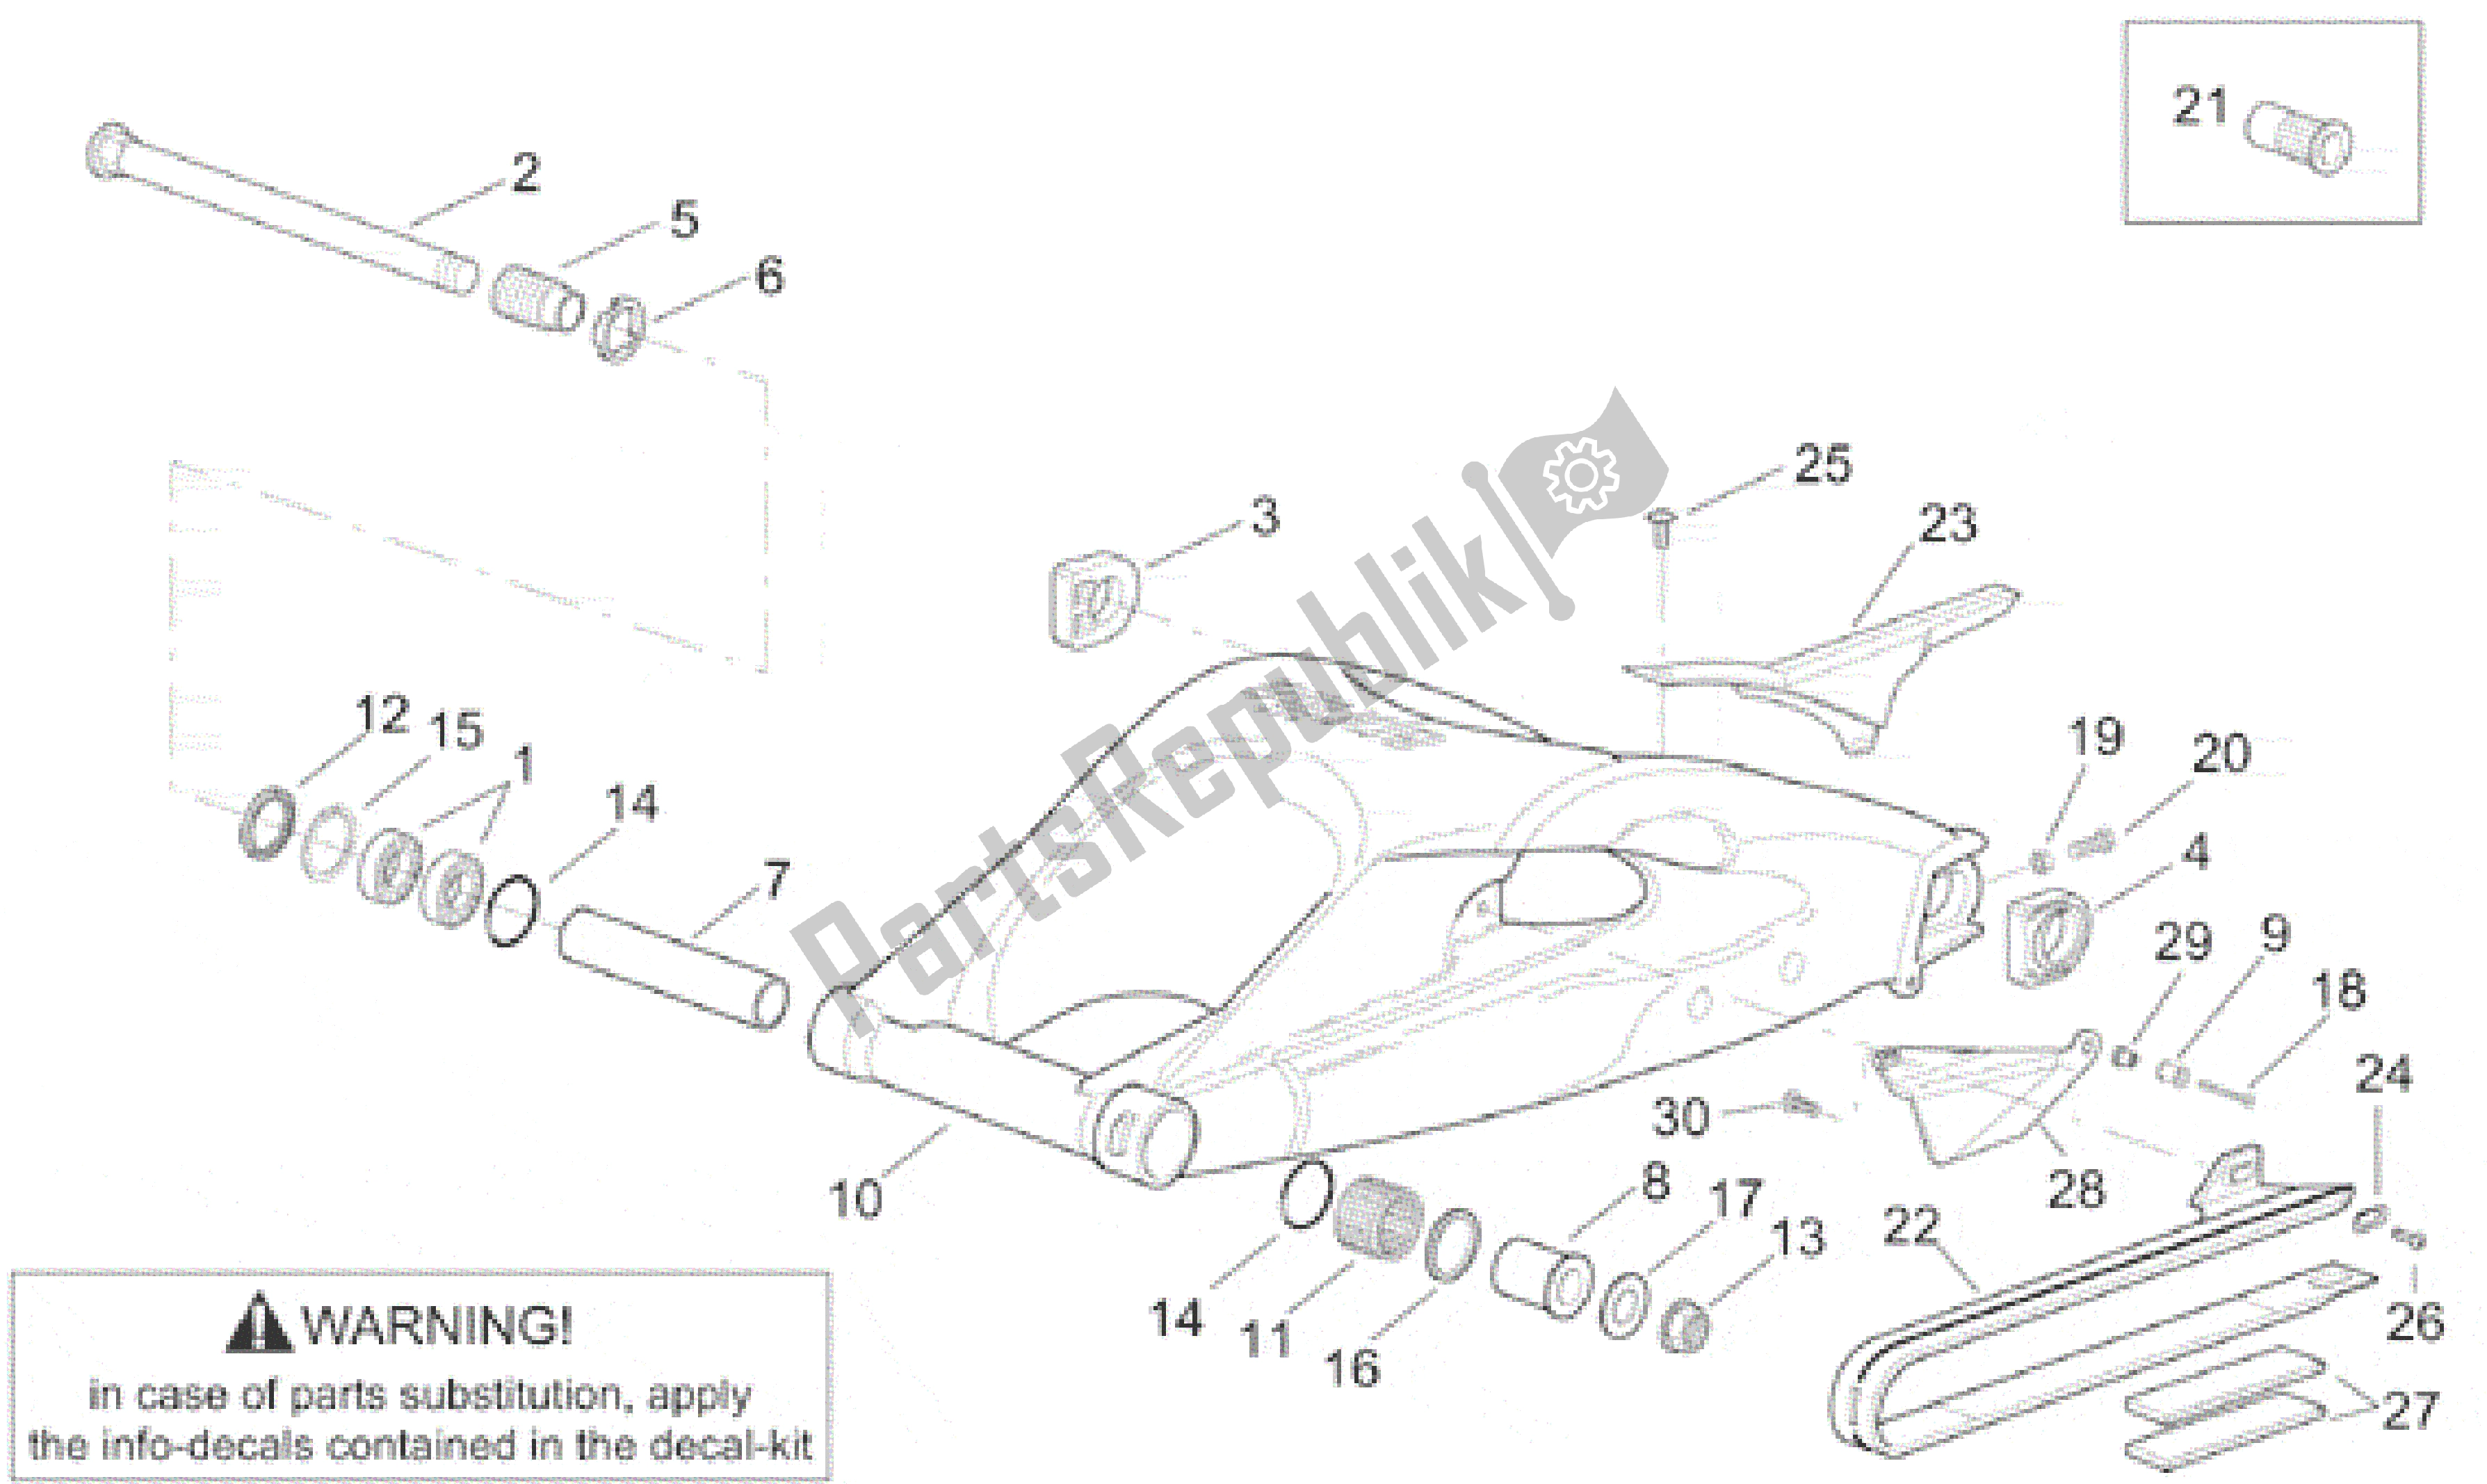 All parts for the Swing Arm of the Aprilia RSV Mille 3901 1000 2001 - 2002